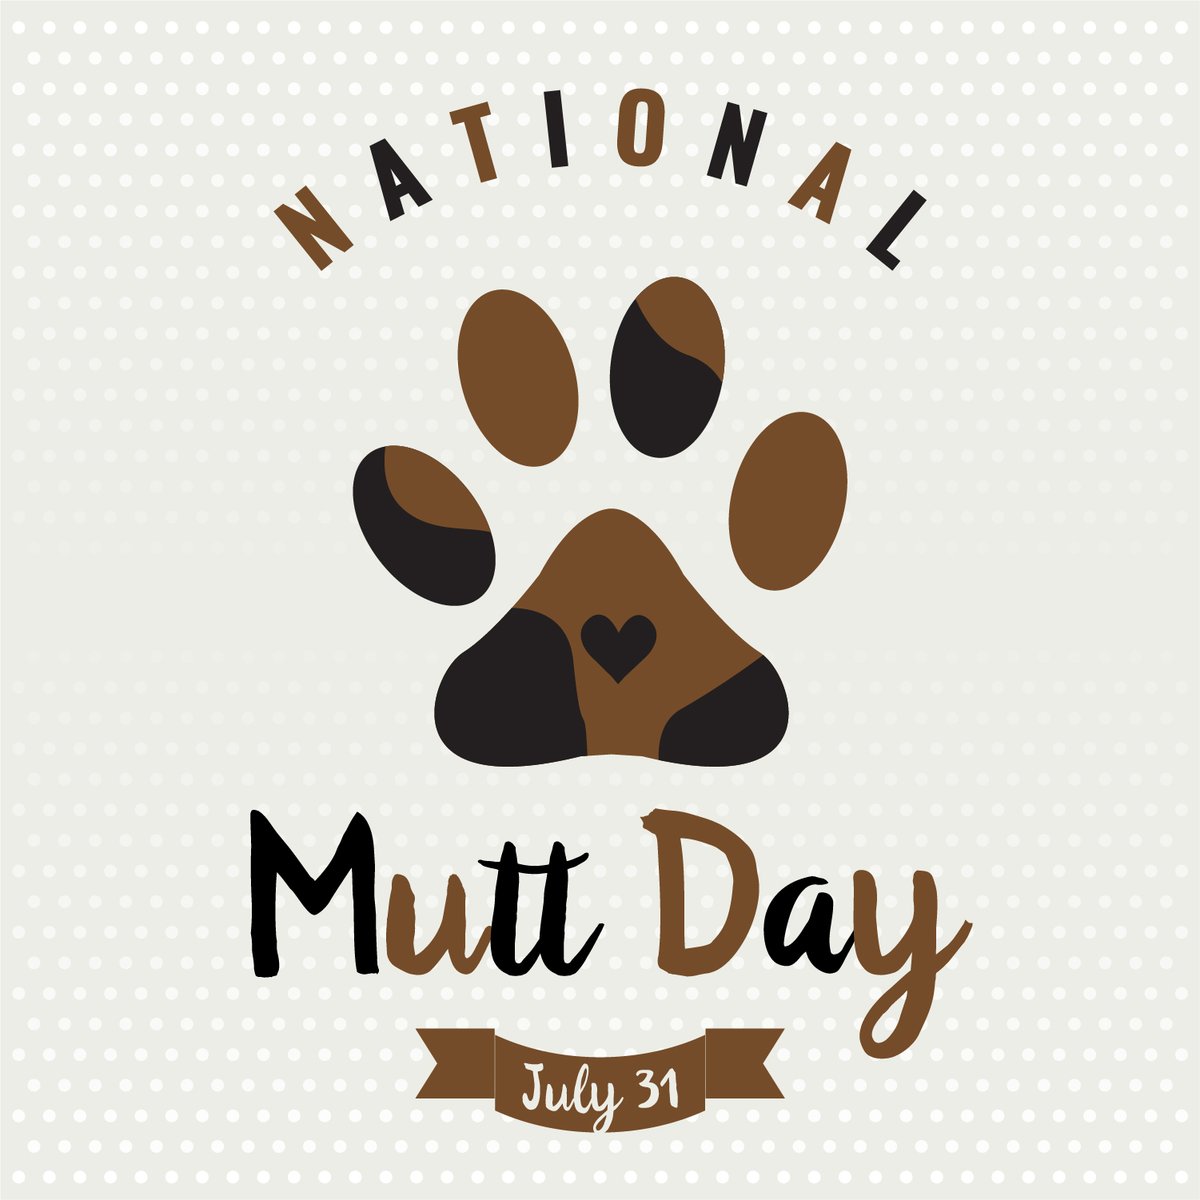 It's National Mutt Day! This special day was created to be celebrated on two dates per year, to raise awareness of the plight of mixed breed dogs in shelters around the nation, as approximately 80% of dogs in shelters are mixed breeds. #nationalmuttday #mixedbreeds